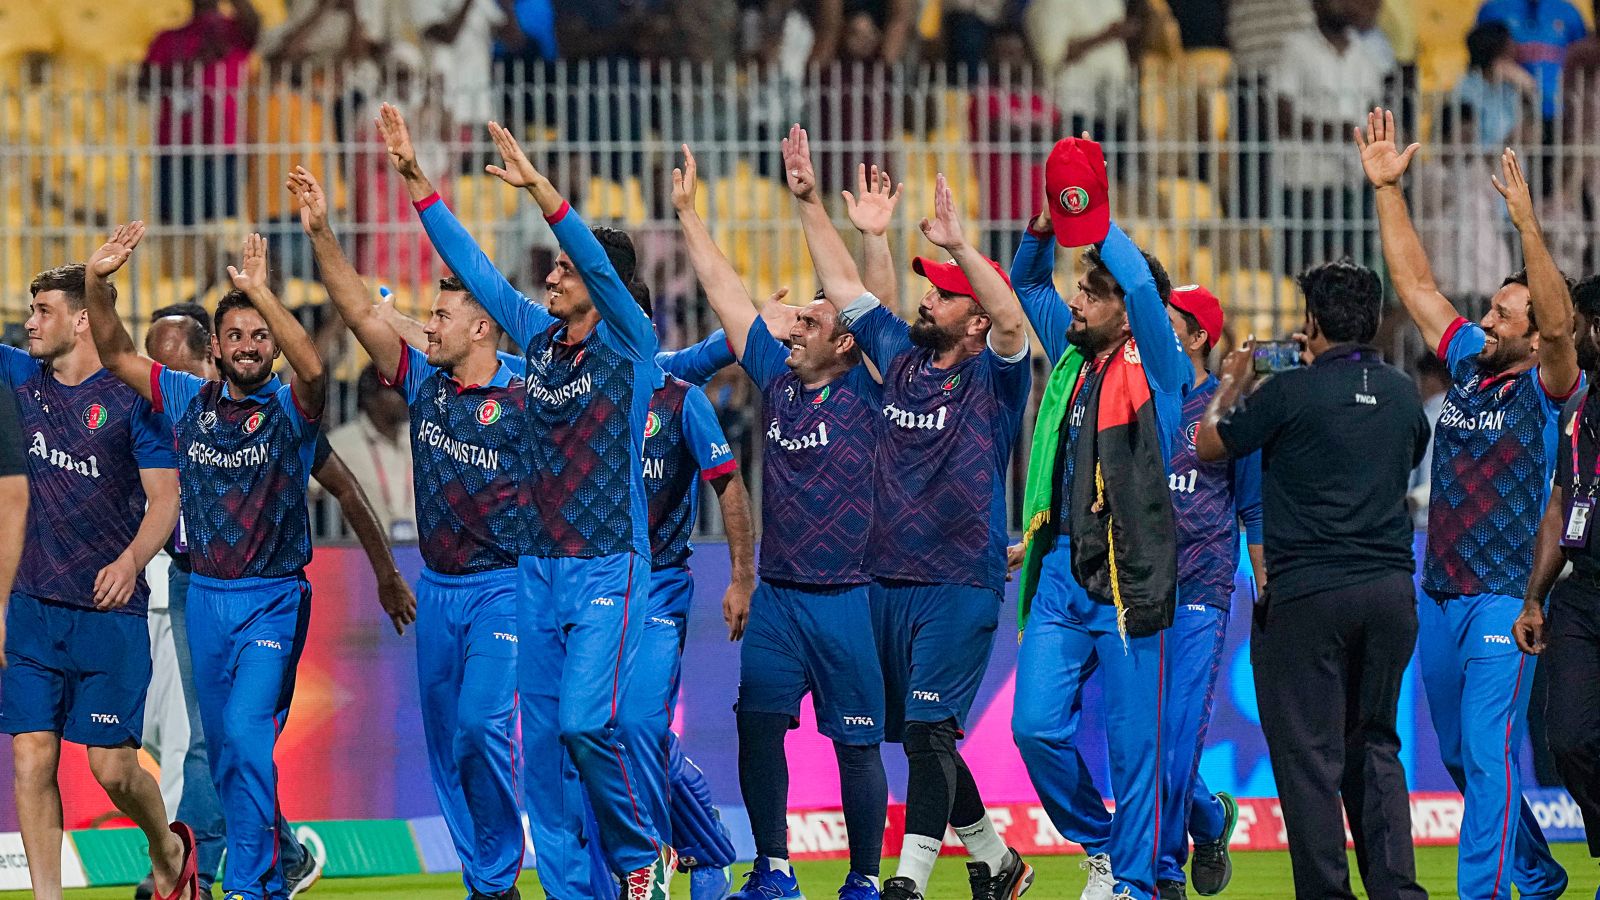 Pakistan May Not Have Made The World Cup Cut, But The Ball Is Another Story